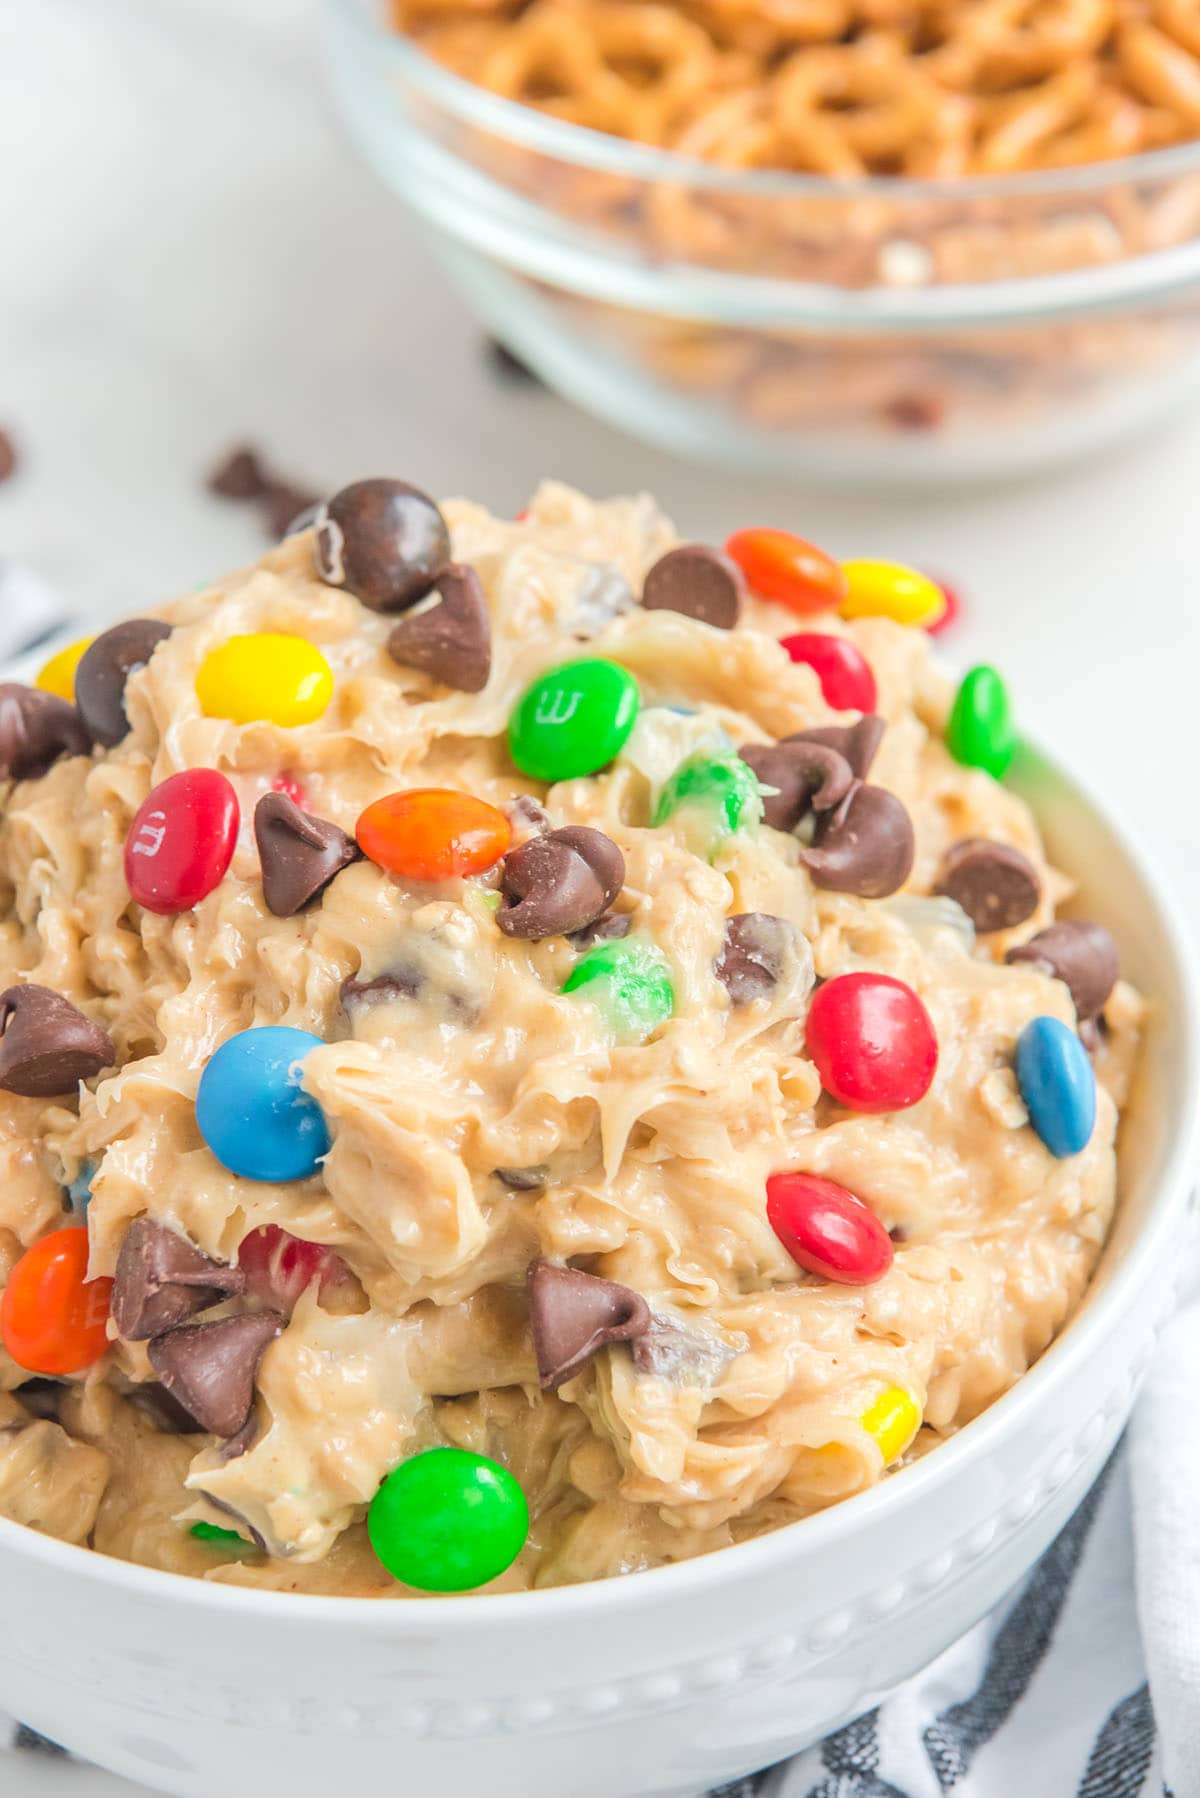 peanut butter dessert dip with m&m's and chocolate chip.